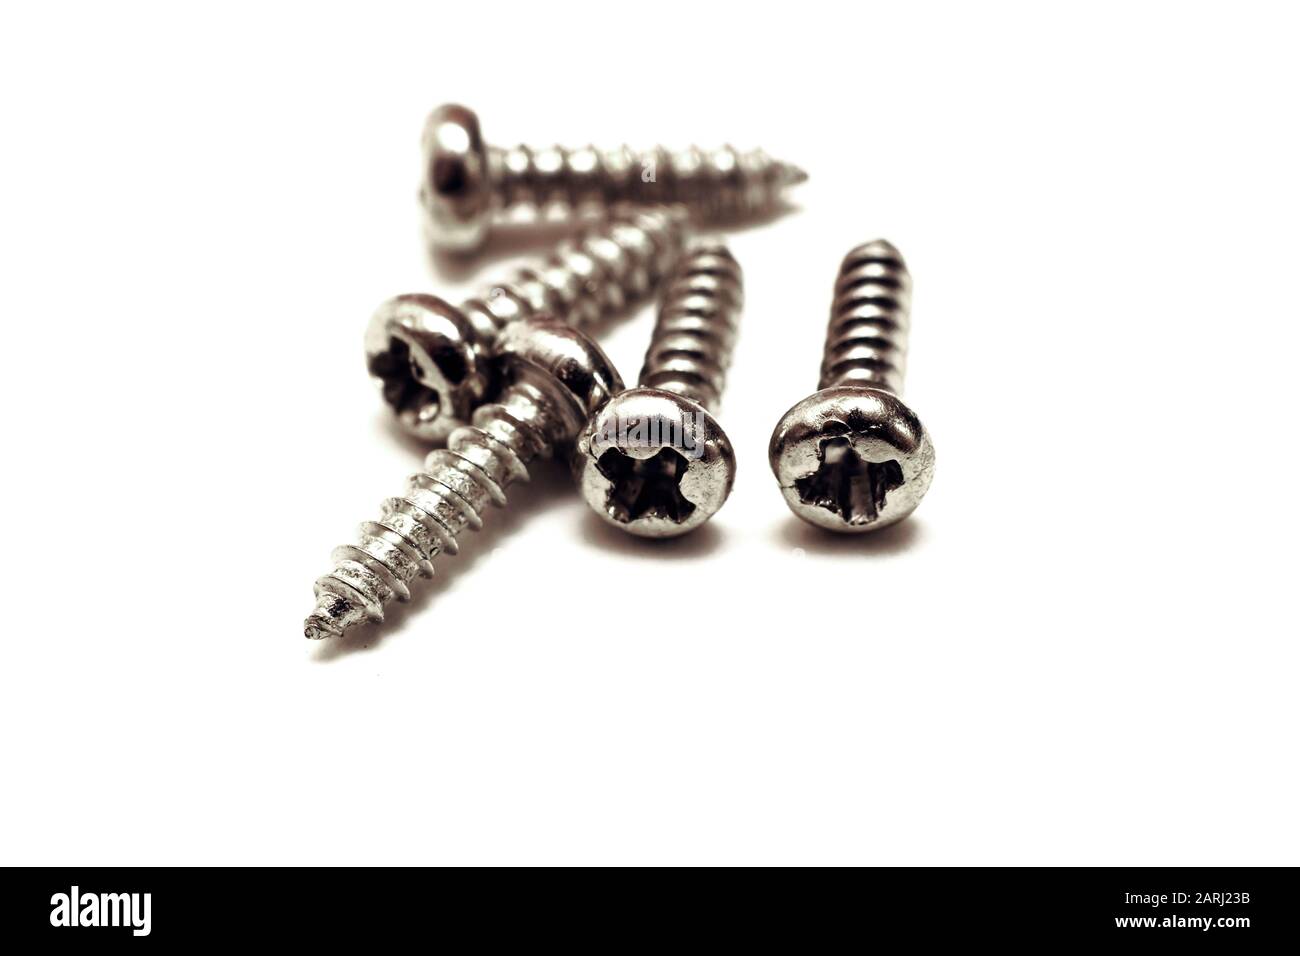 A pile of small metal bolts isolated on white background Stock Photo